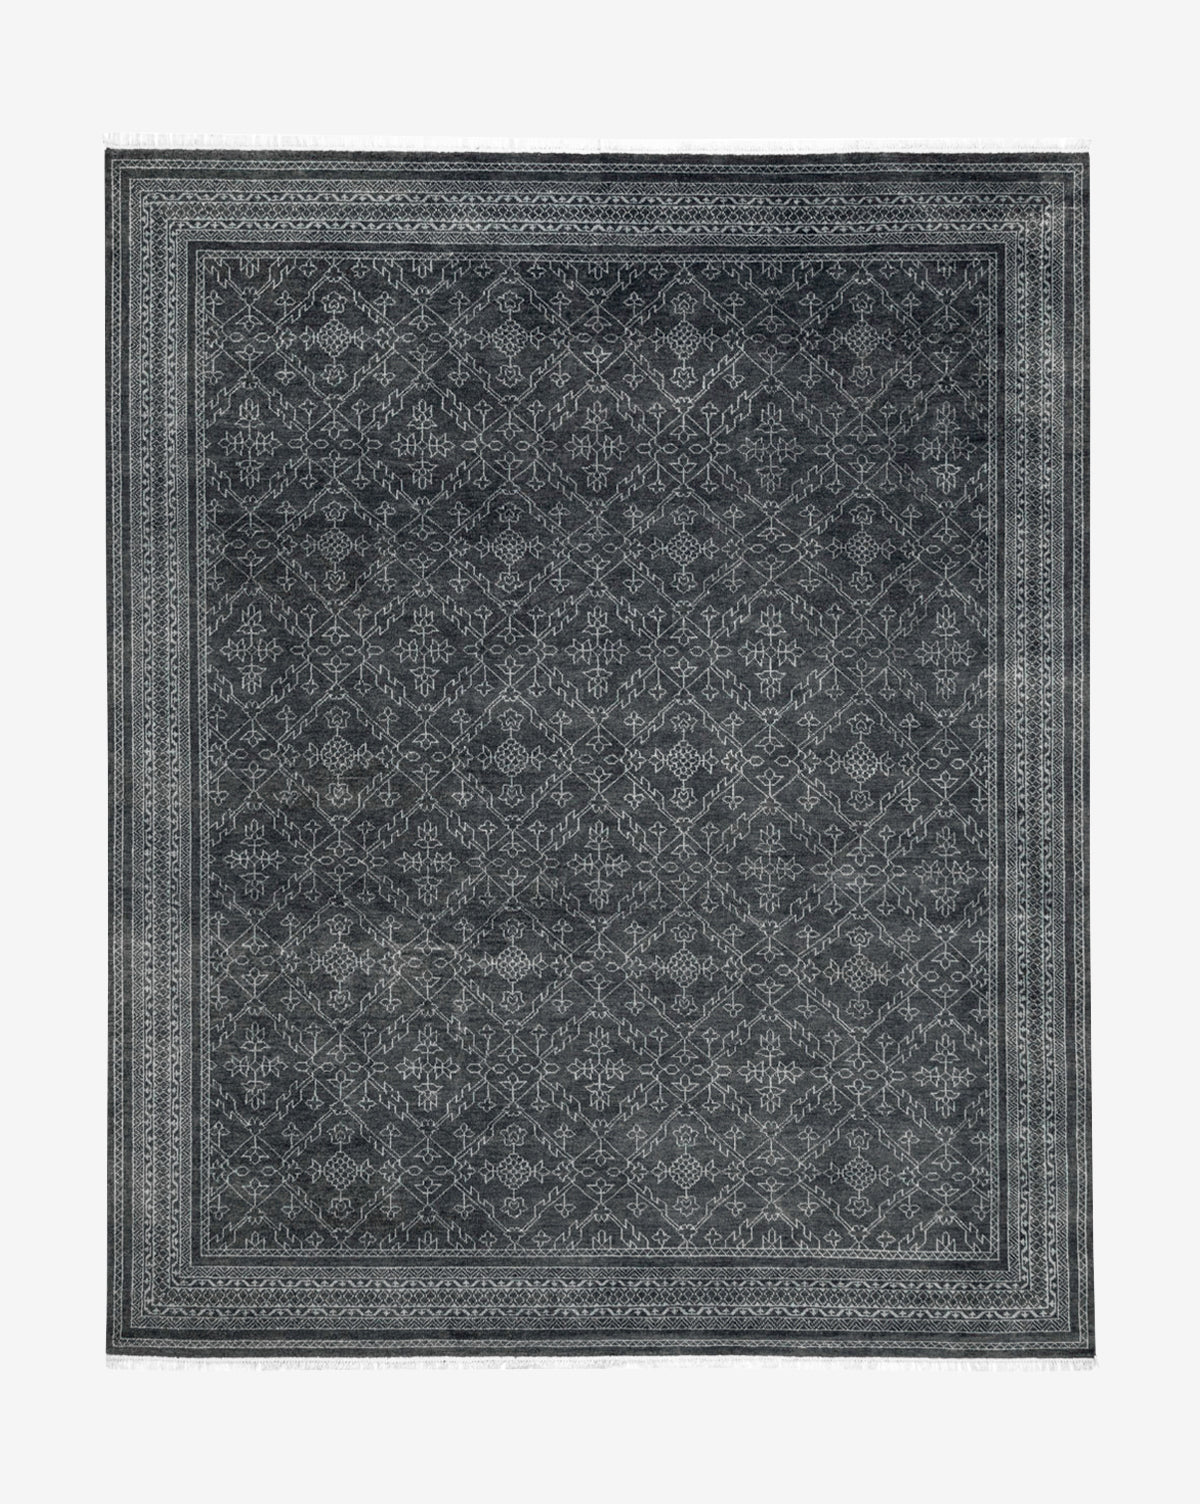 Obeetee, Kazan Hand-Knotted Wool Rug